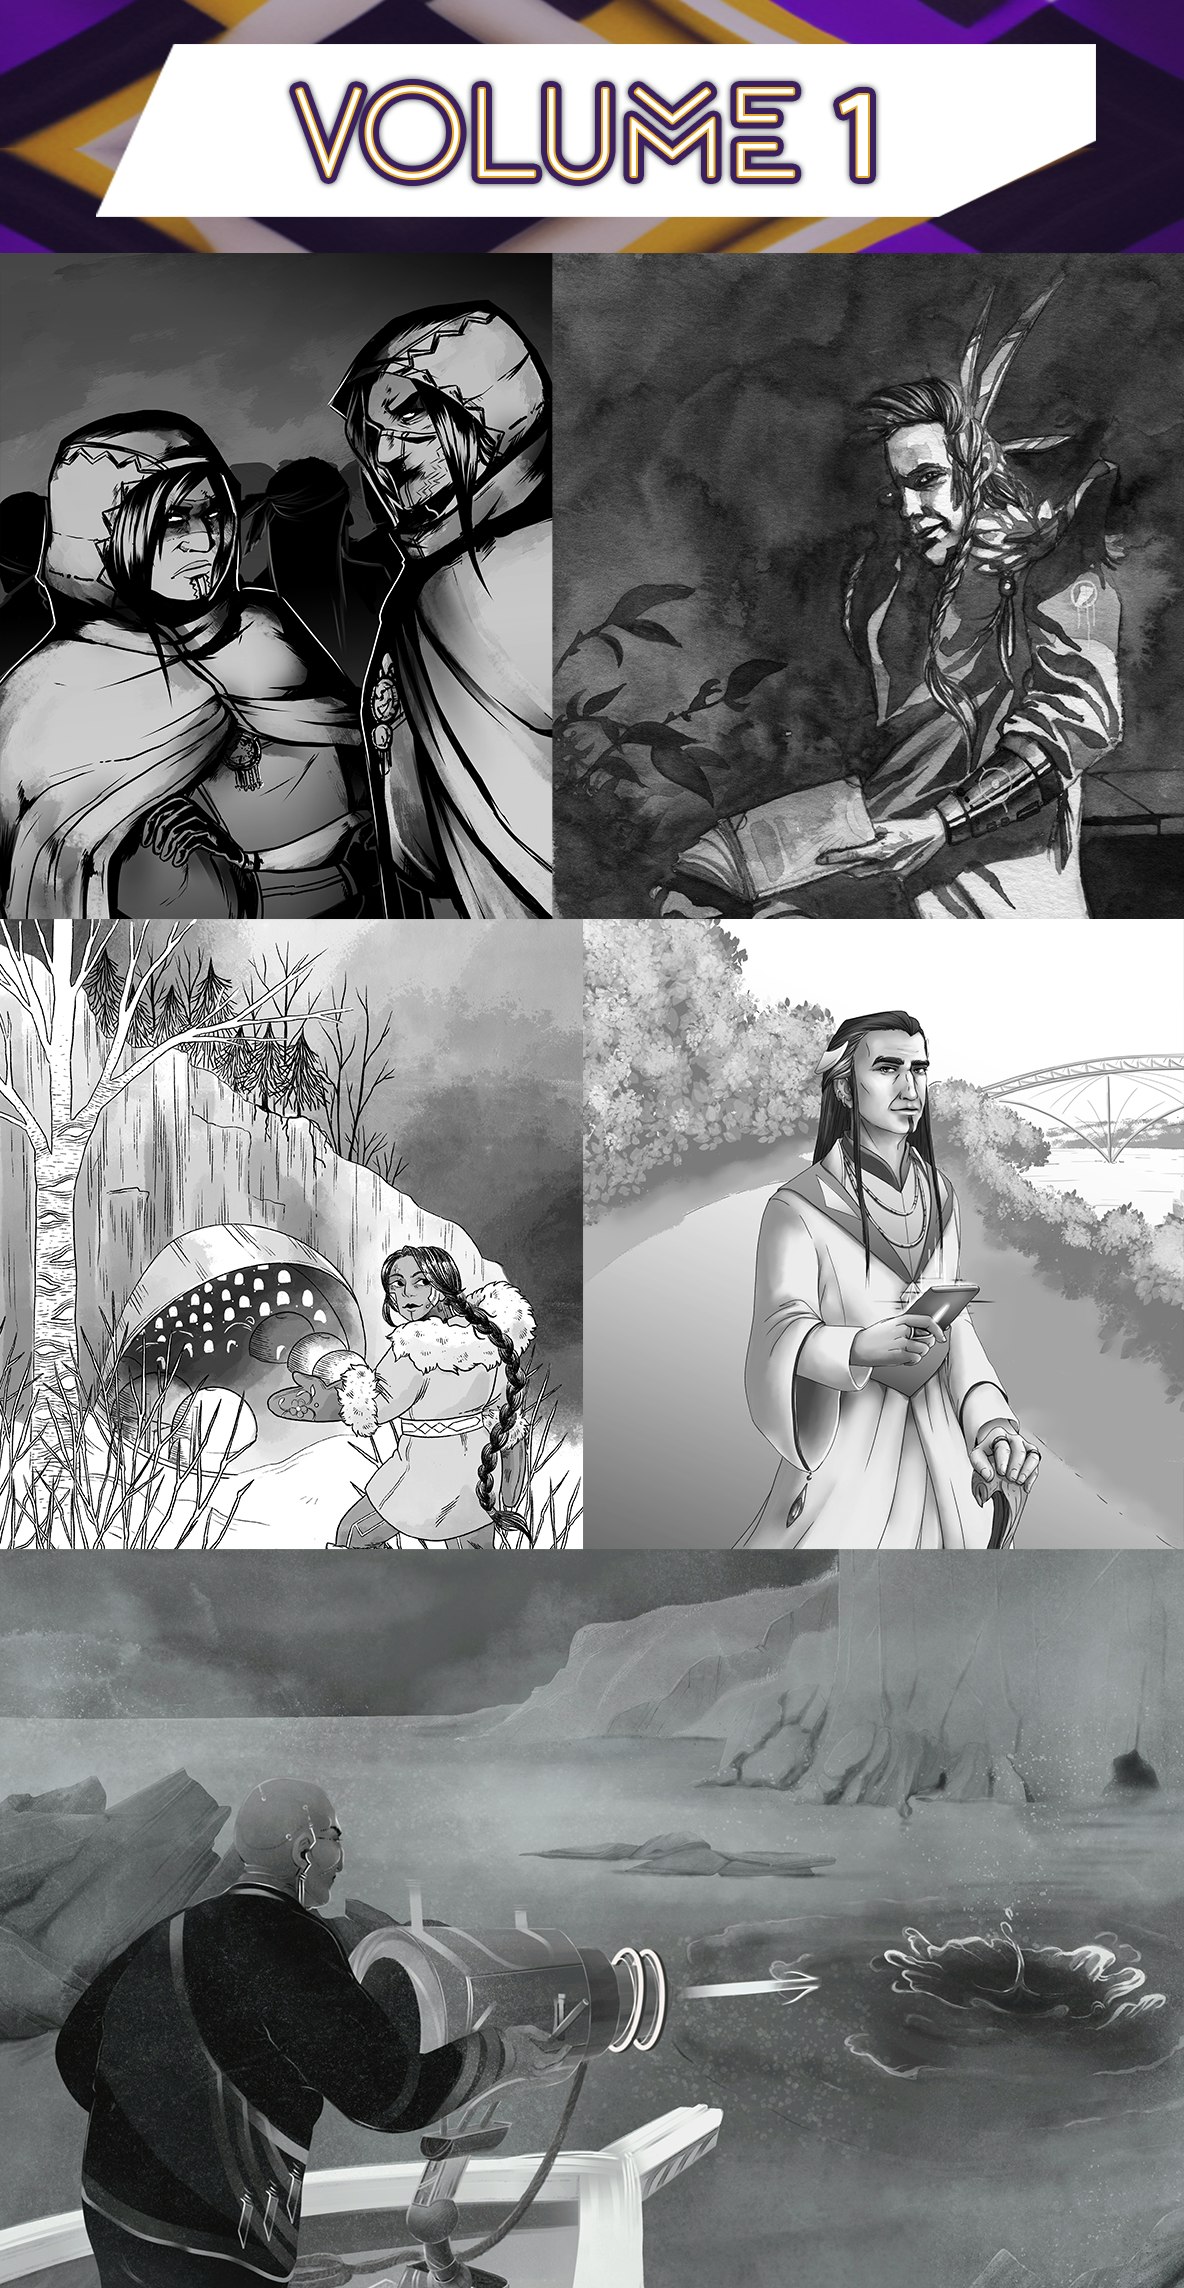 A collage of some of the art from Stories of the Free Lands Volume 1